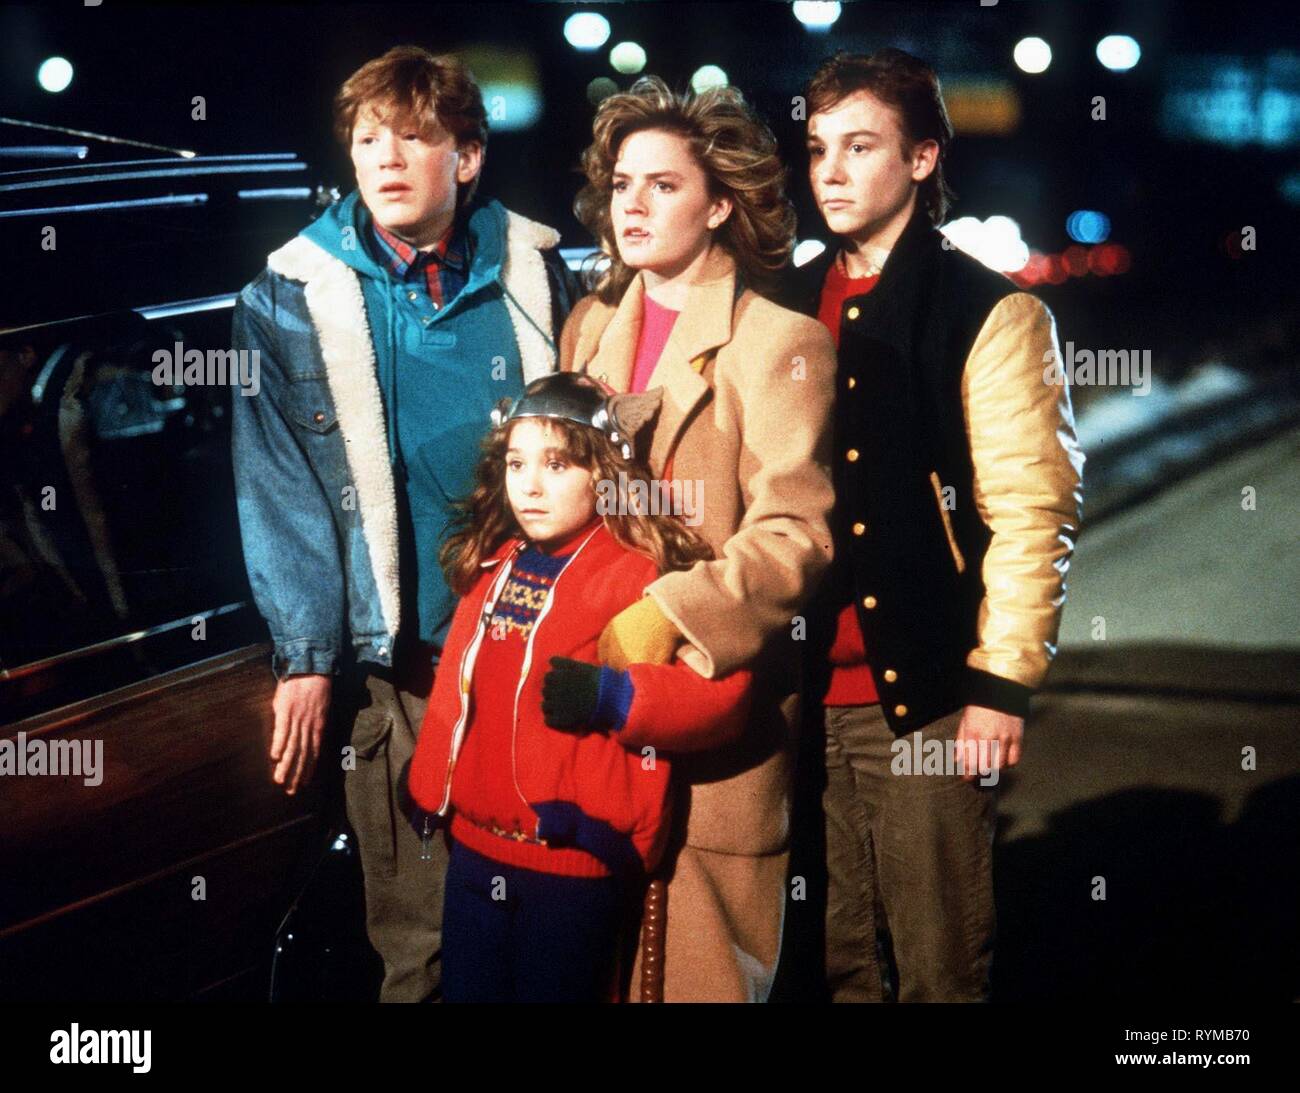 RAPP,BREWTON,SHUE,COOGAN, A NIGHT ON THE TOWN: ADVENTURES IN BABYSITTING, 1987 Stock Photo